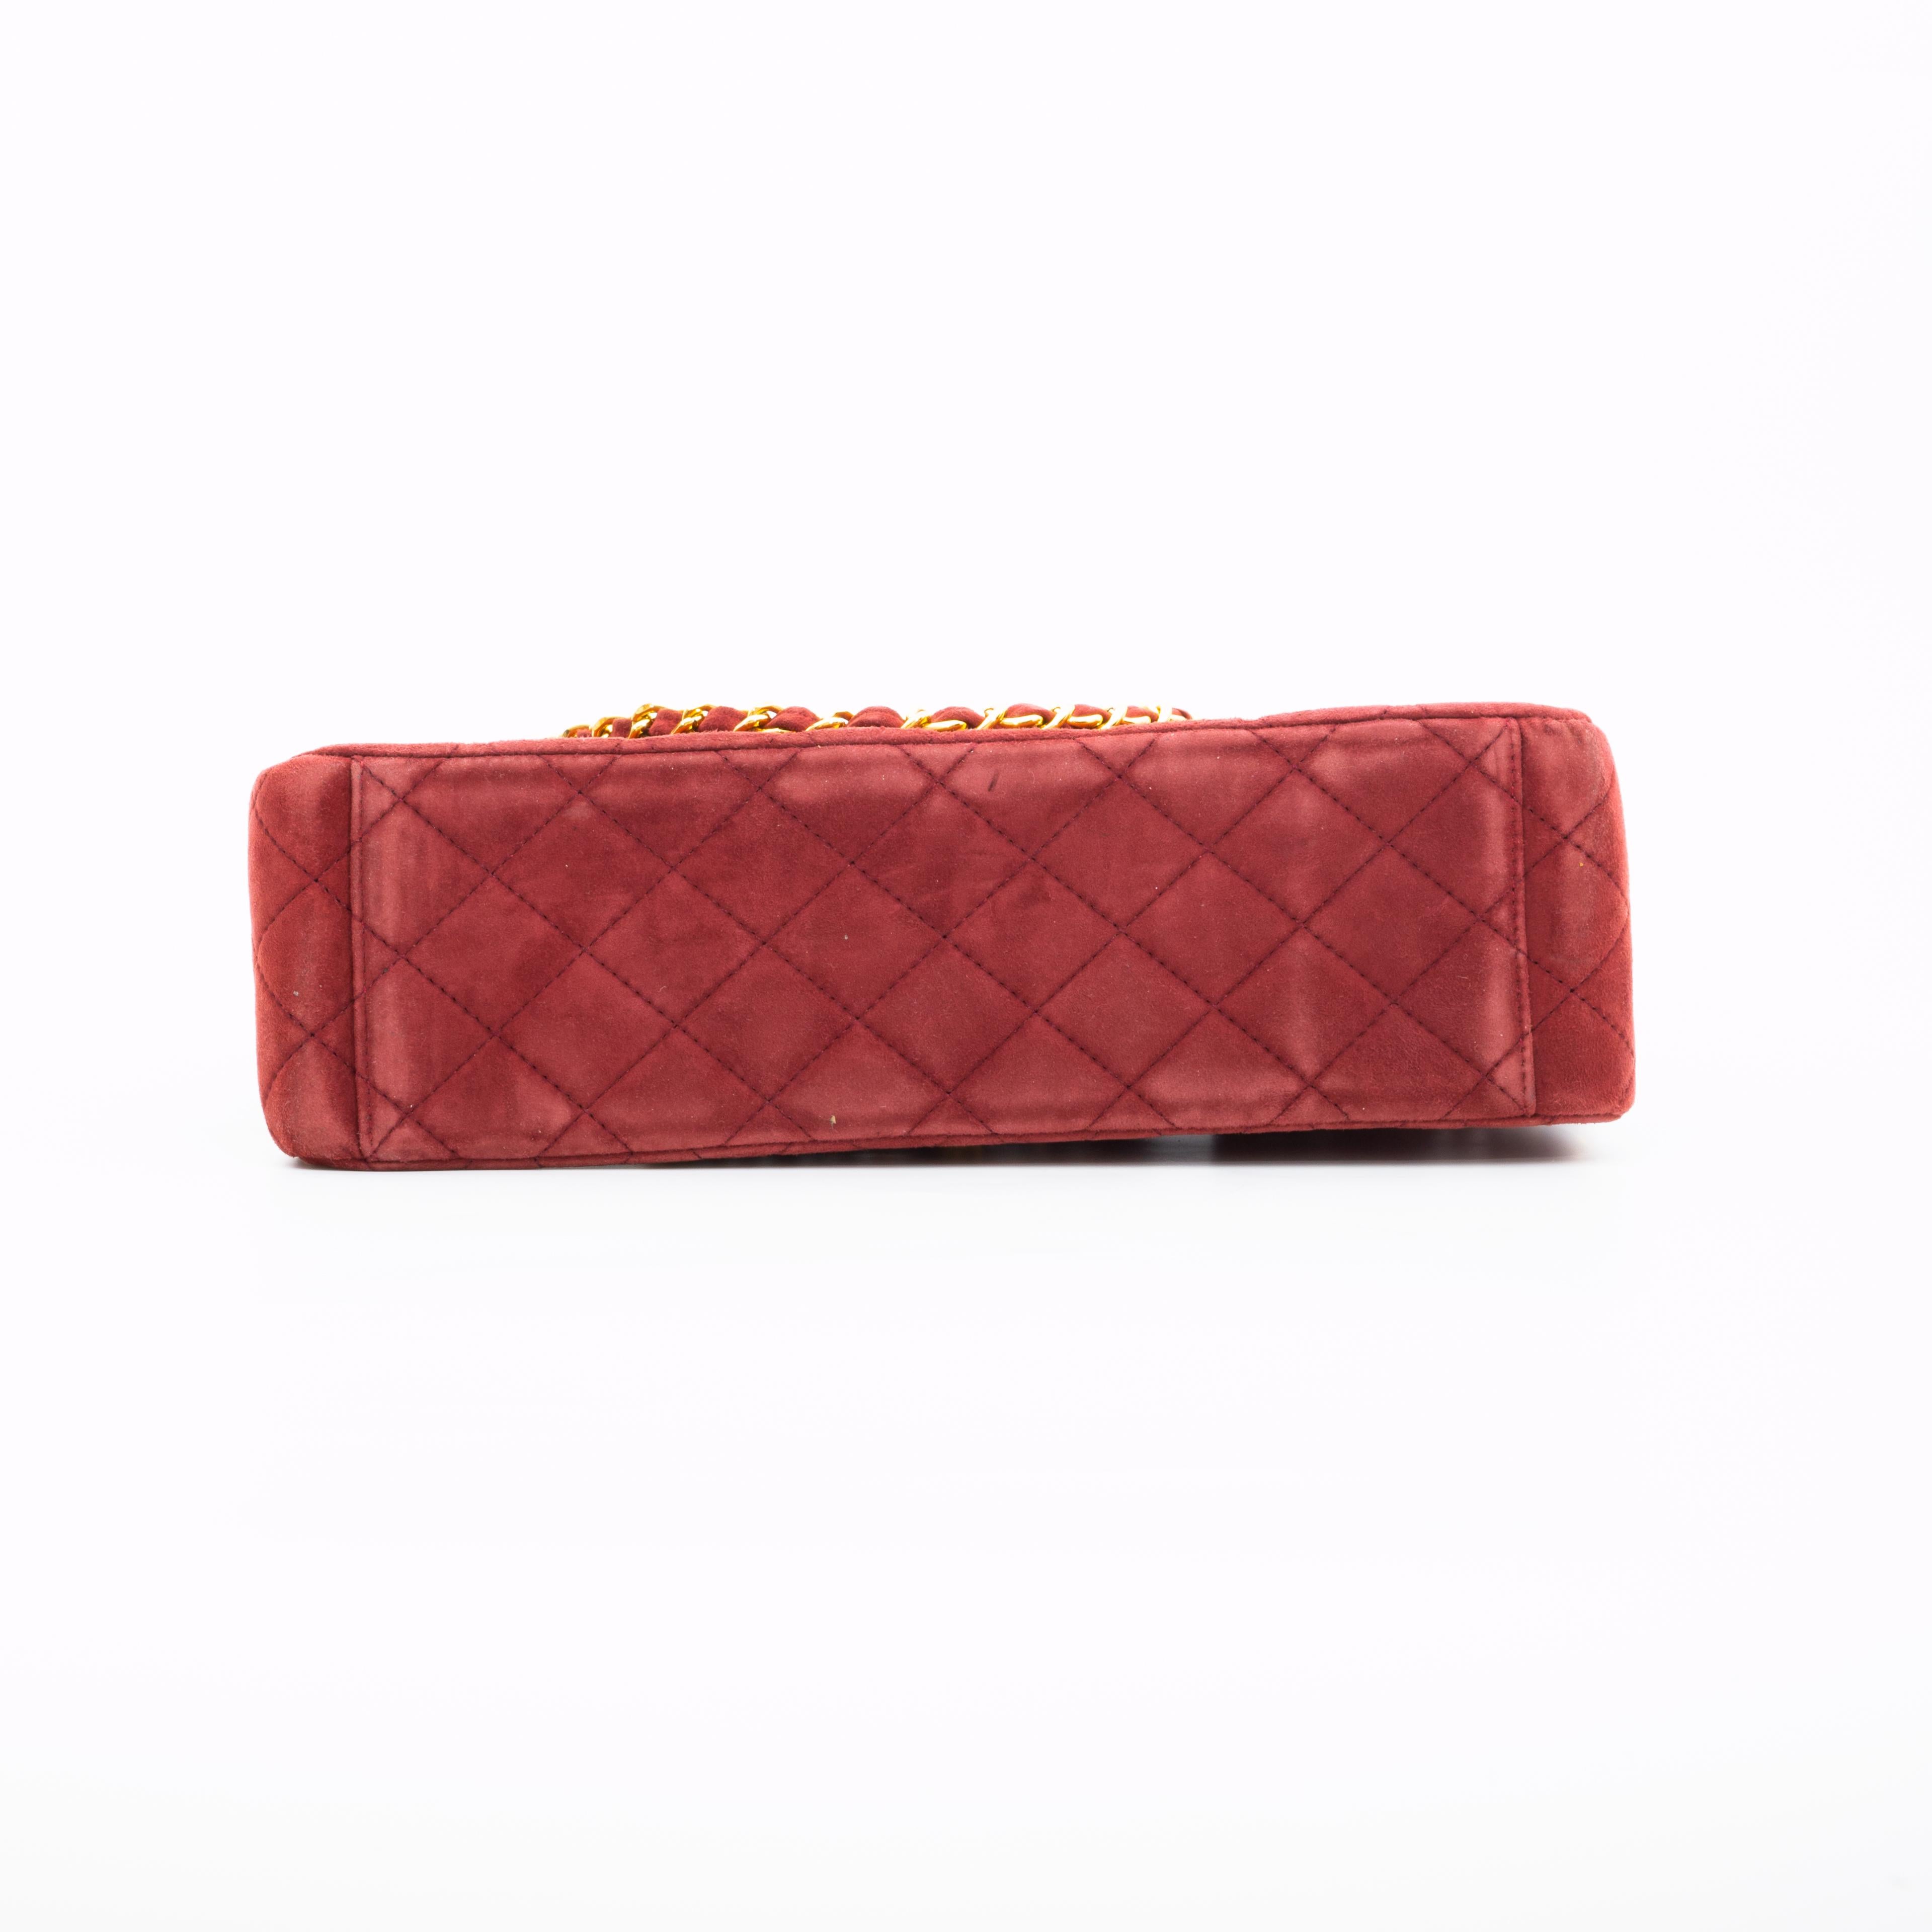 Chanel Classic Quilted Burgundy Suede Jumbo Single Flap Bag In Good Condition For Sale In Montreal, Quebec